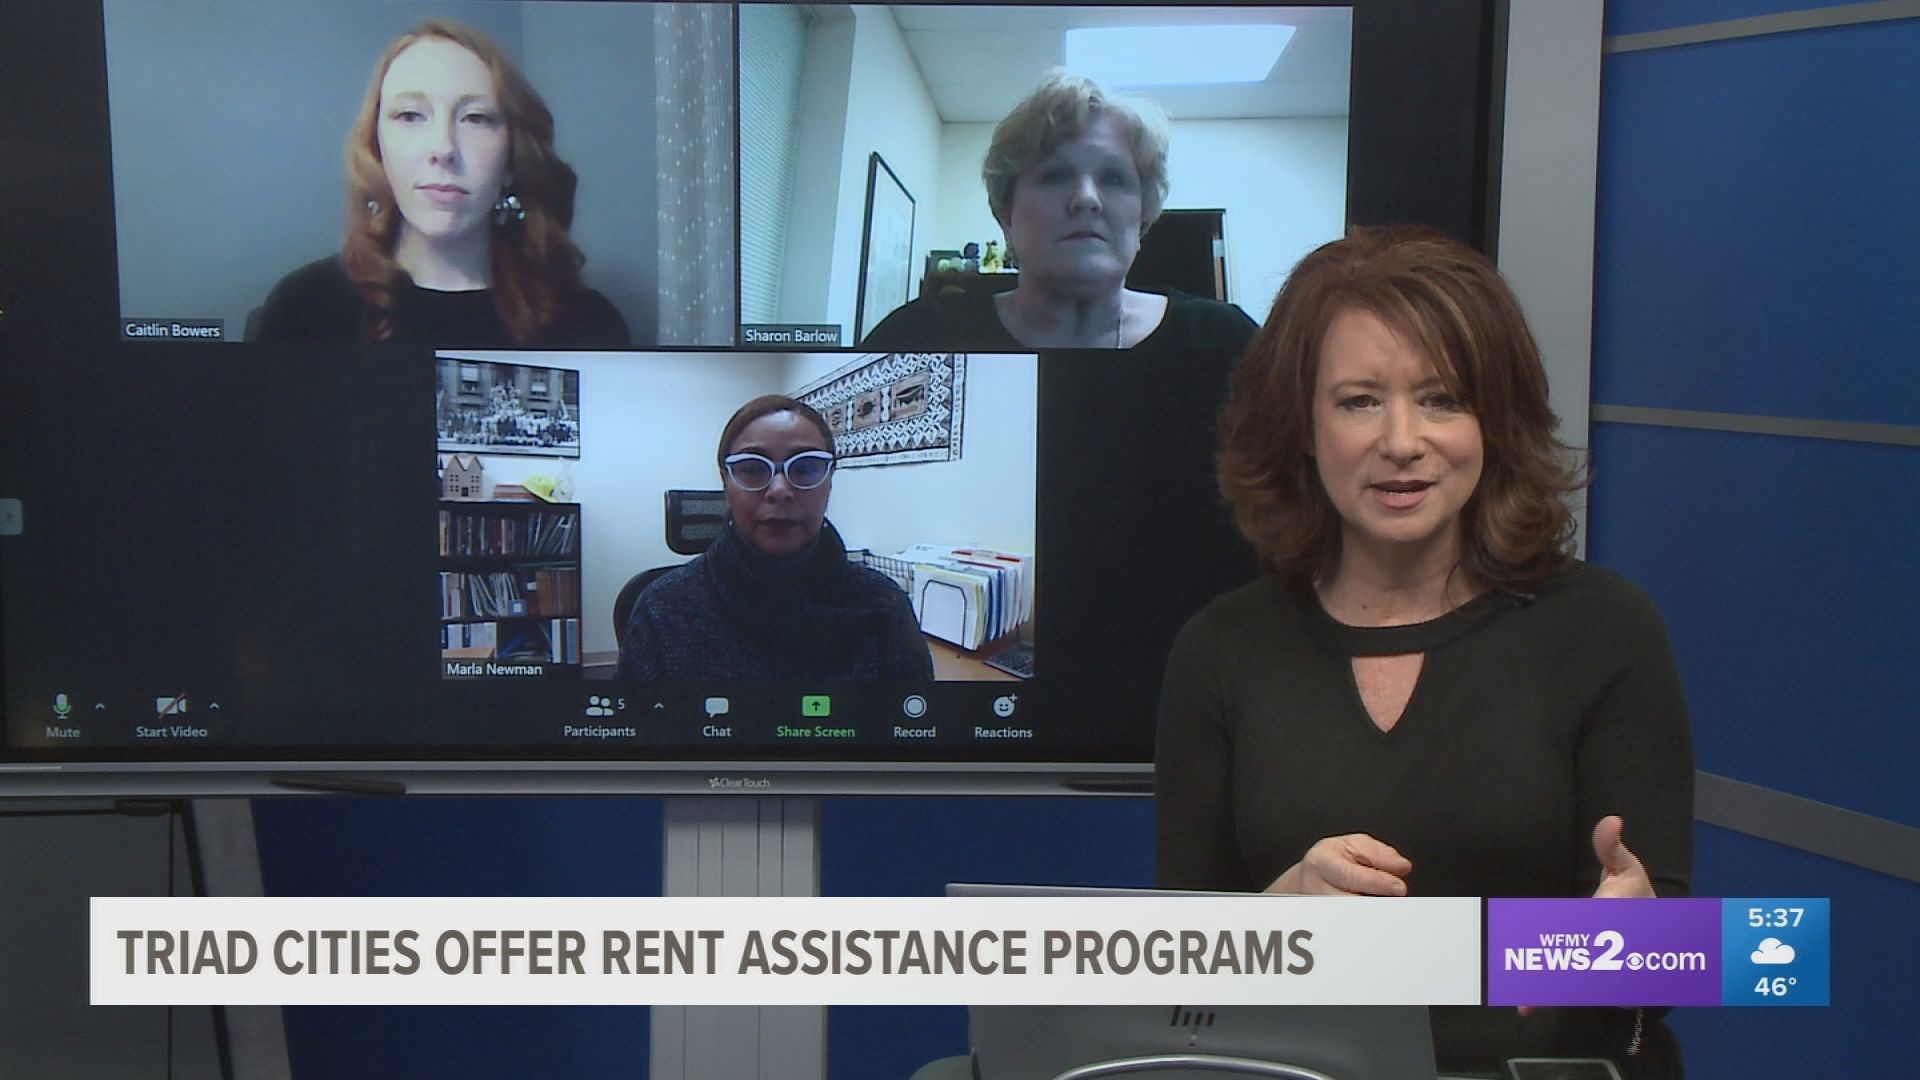 Guilford, Winston-Salem/Forsyth counties and Greensboro all have rental assistance programs funded by the federal Emergency Rental Assistance Program.